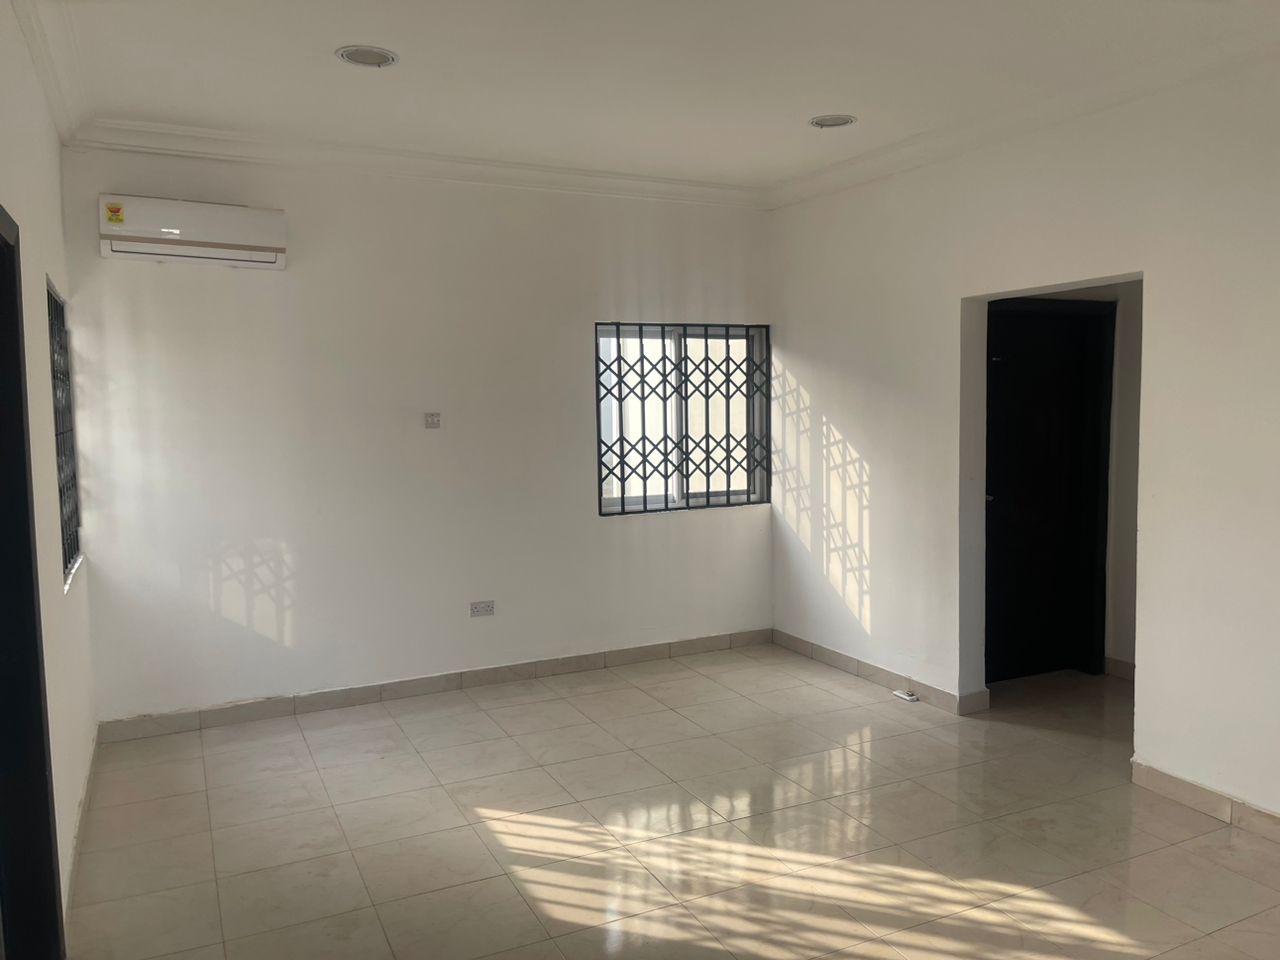 Two (2) Bedroom Town House For Sale at Oyarifa